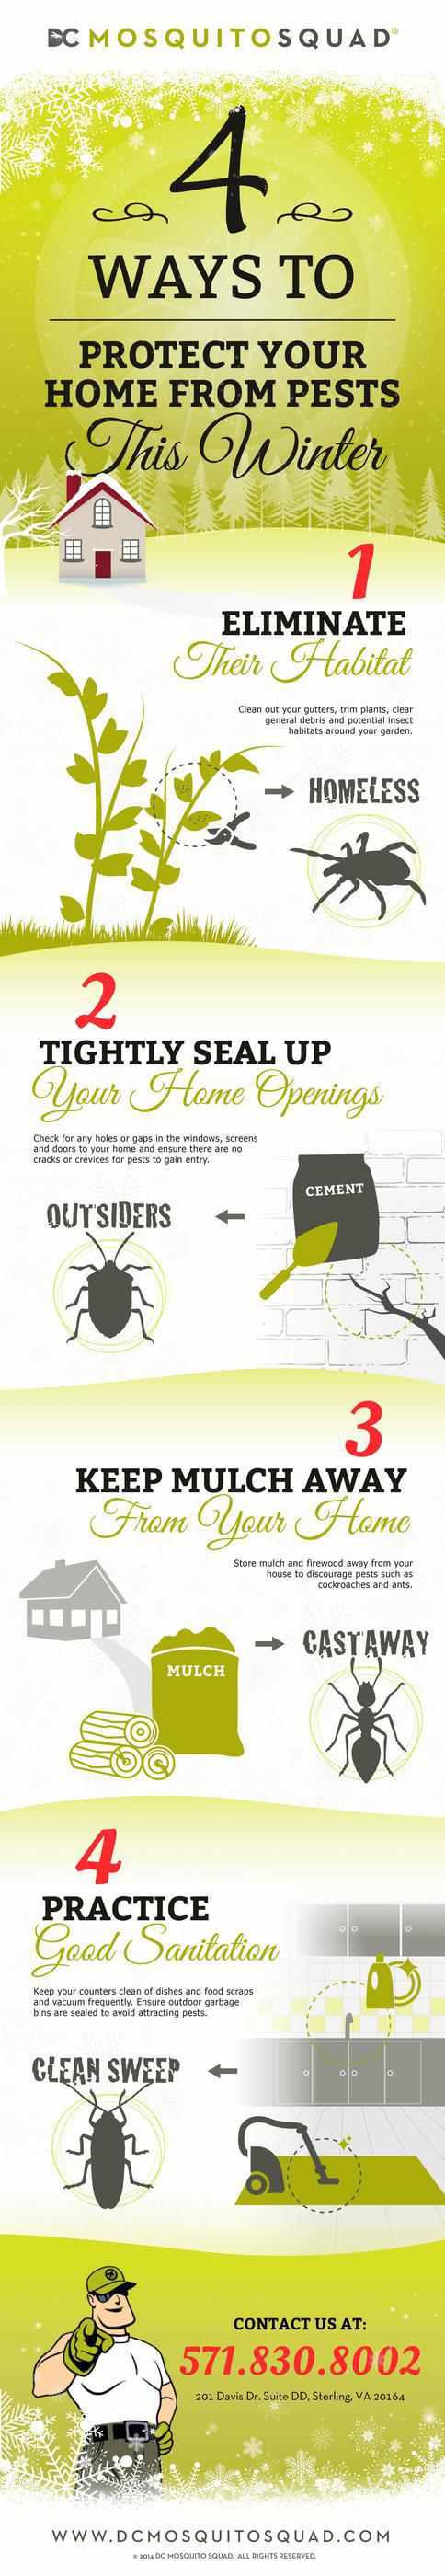 4 Ways to Protect Your Home From Pests This Winter